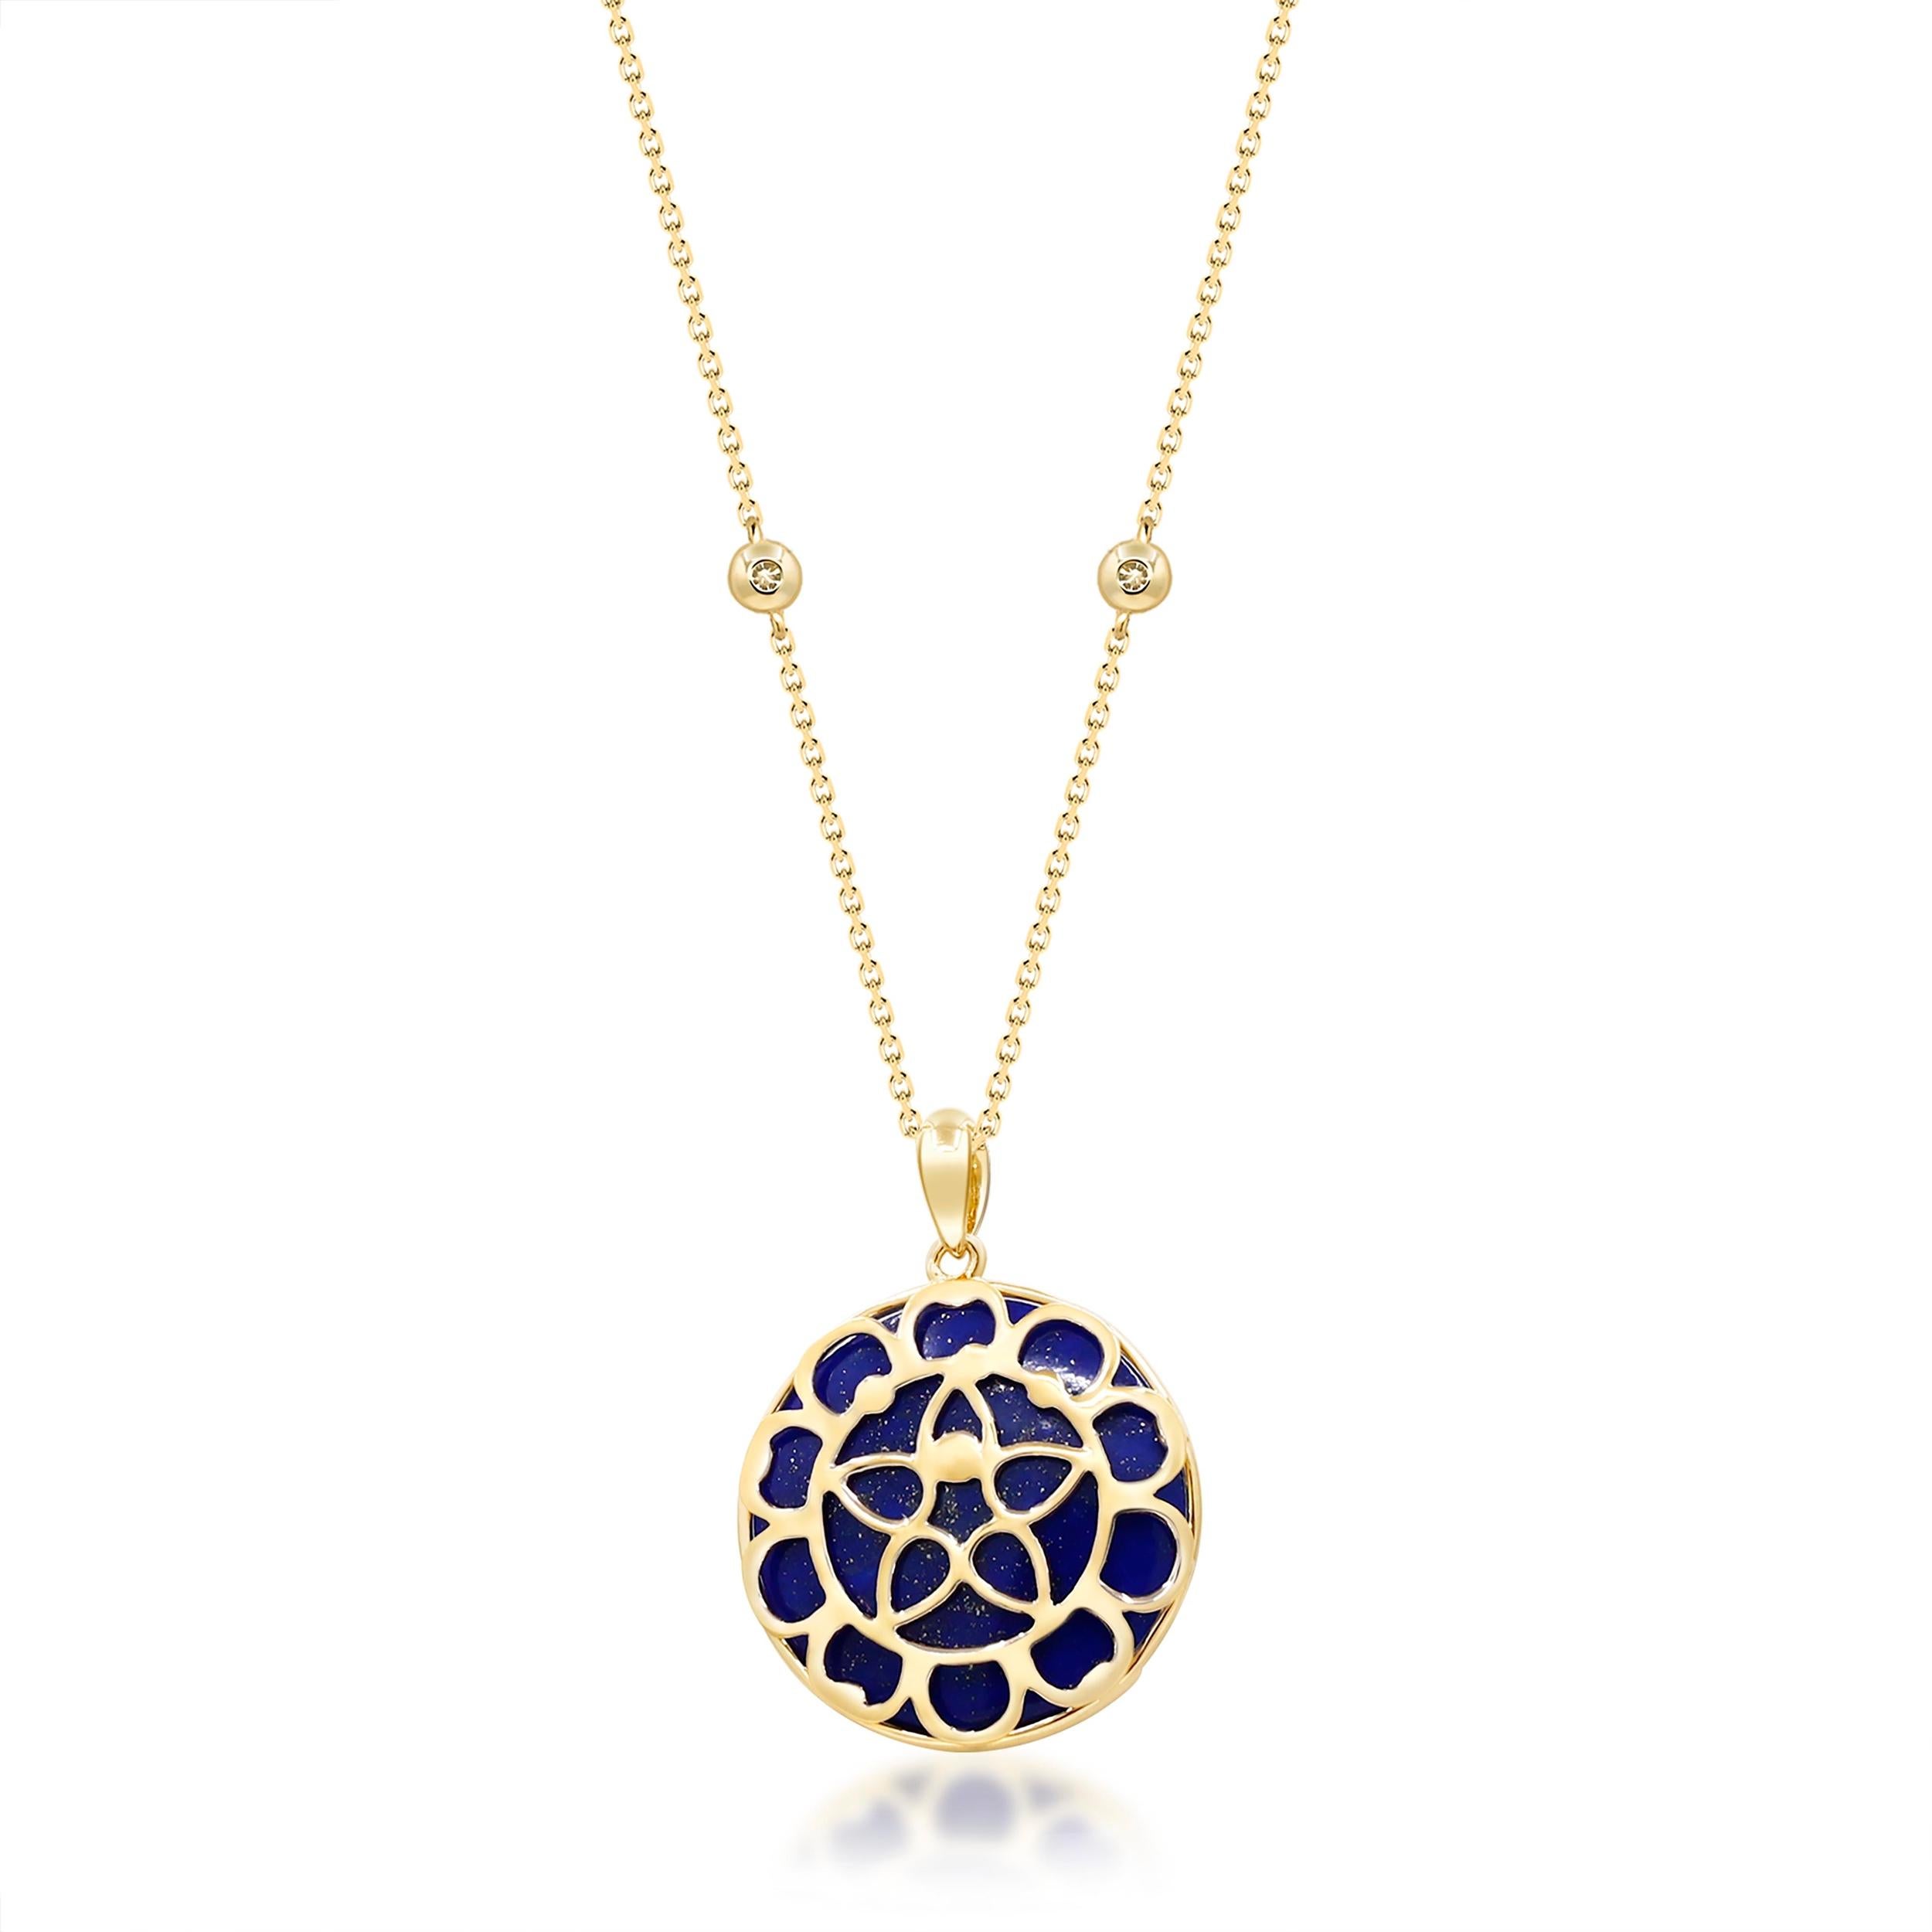 Decorate yourself in elegance with this Pendant is crafted from 14-karat Yellow Gold by Gin & Grace. This Pendant is made up of 2.0 Round-cut Emerald (8 pcs) 0.33 carat, 10.0 Round-cut Lapis (1 pcs) 10.02 carat and round-cut White Diamond (29 Pcs)